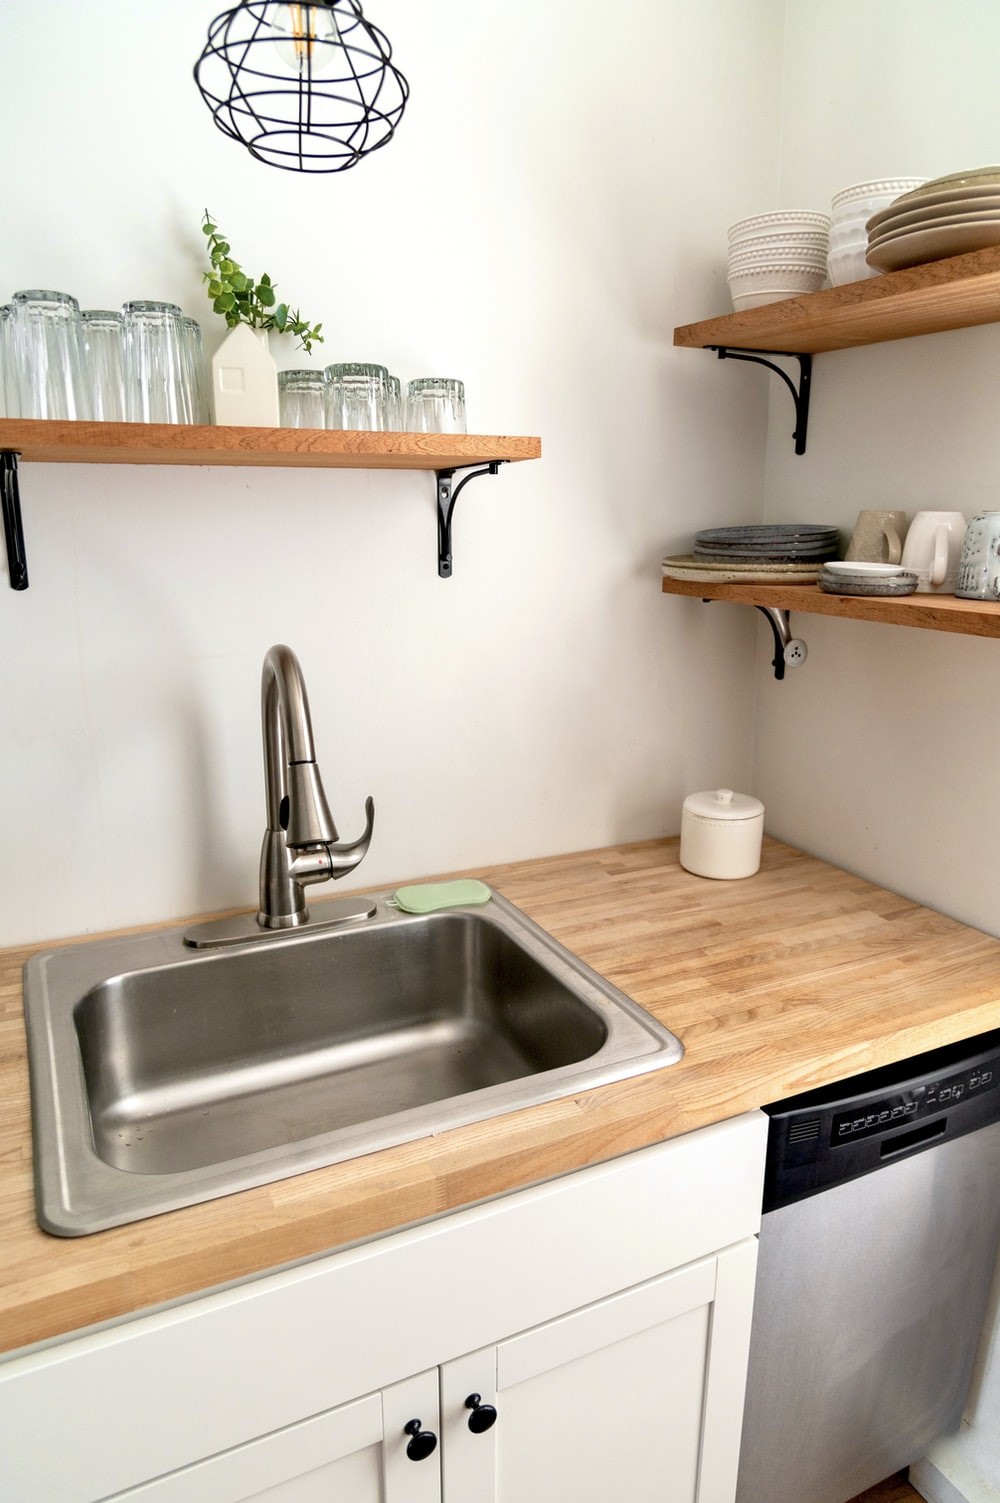 10 unique sink designs to upgrade your kitchen - times property